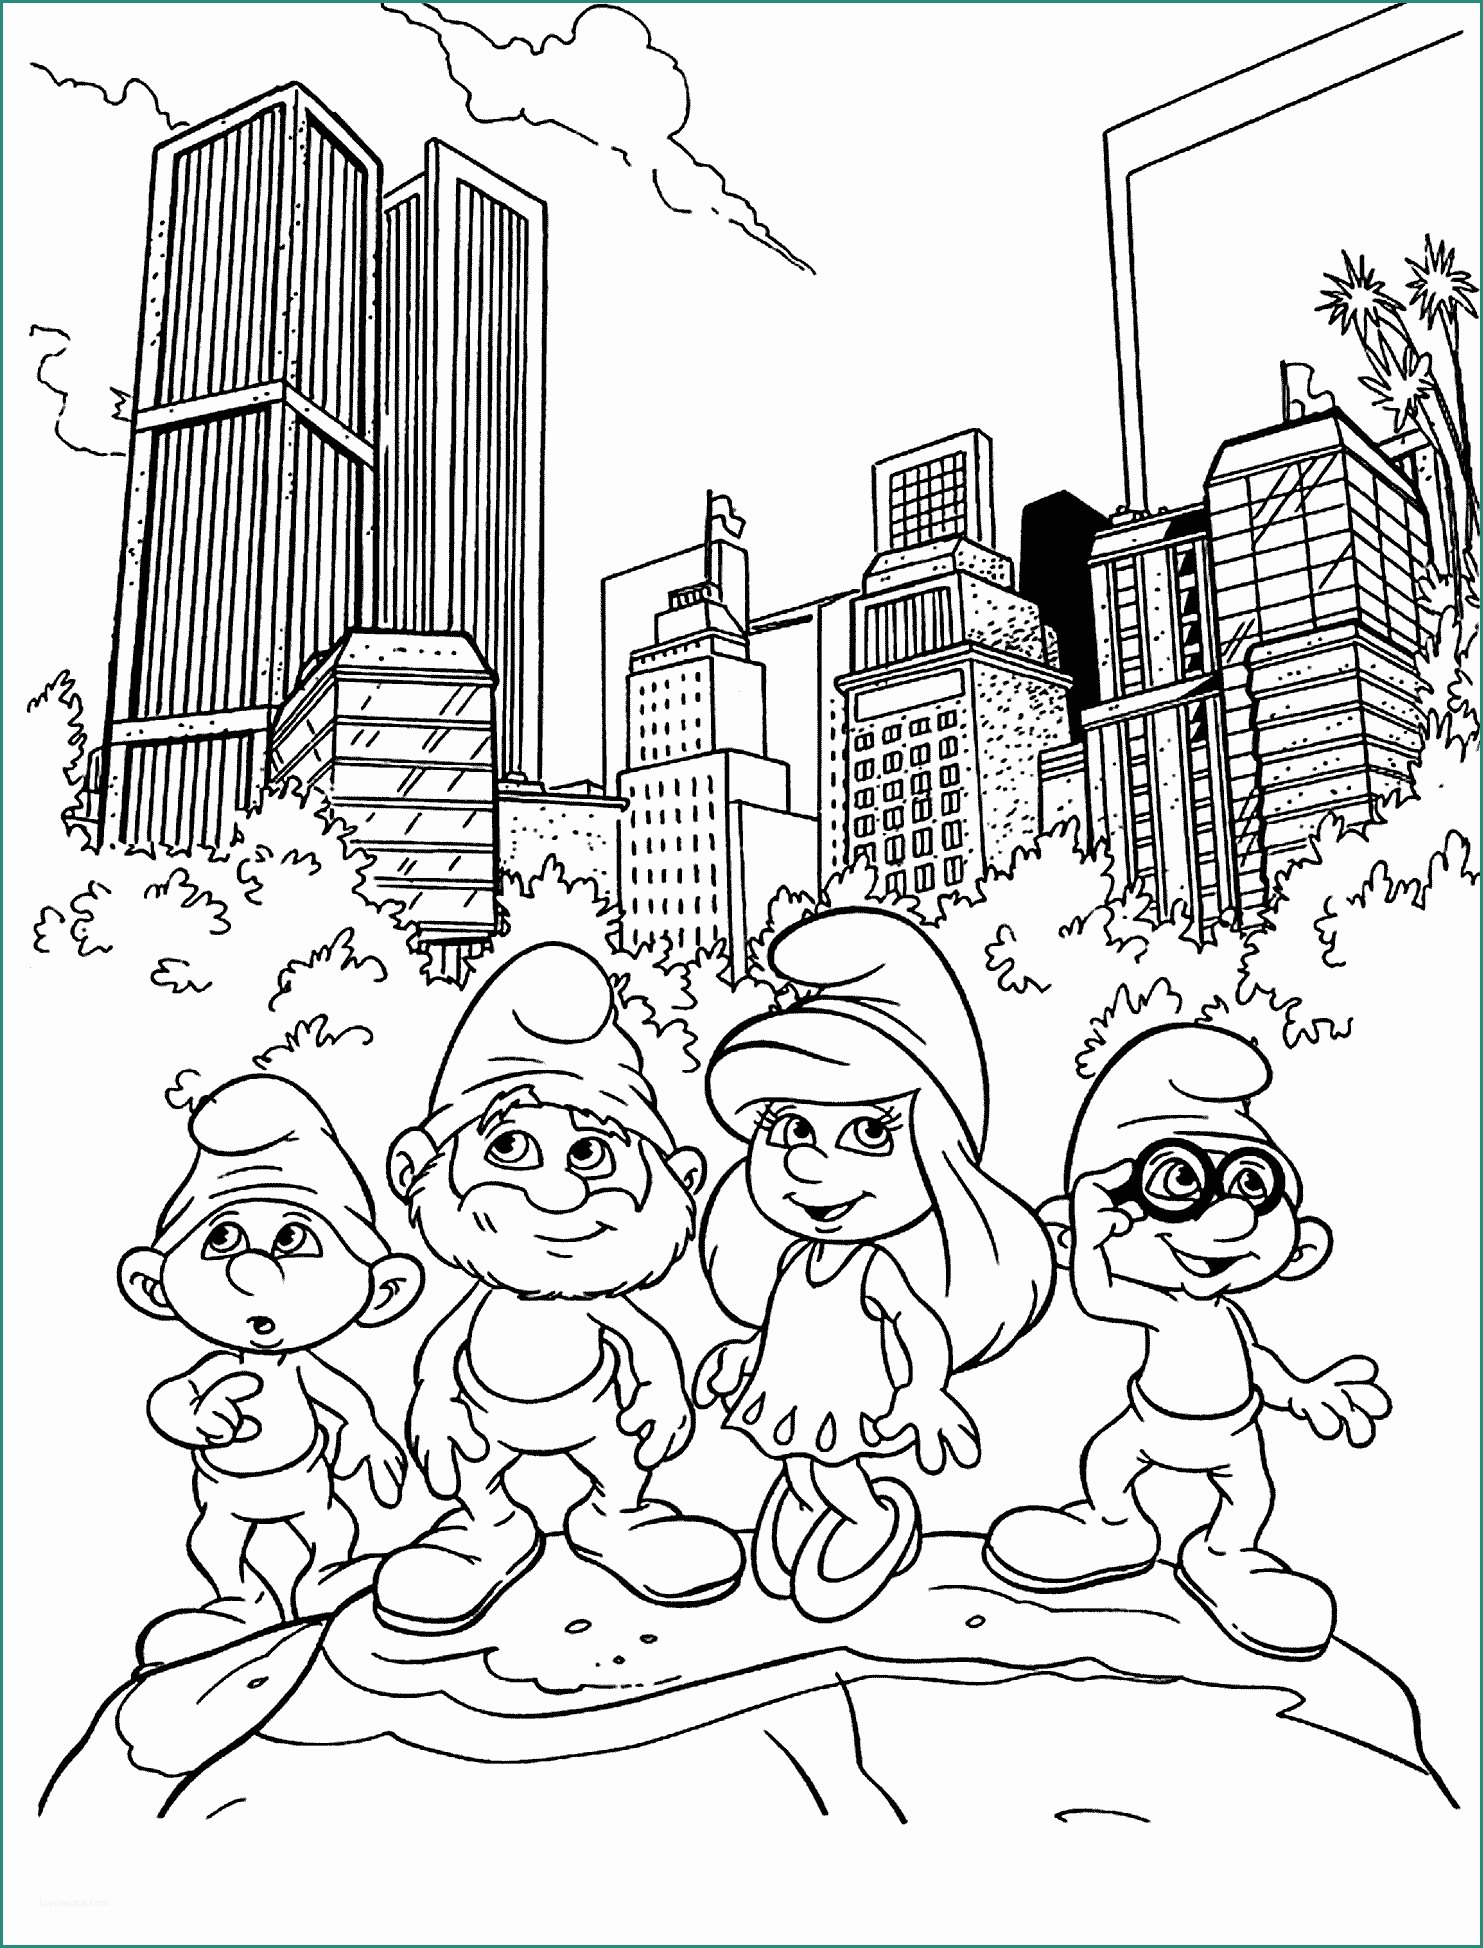 Spiderman Da Disegnare E the Smurfs In town Coloring Pages for Kids Printable Free